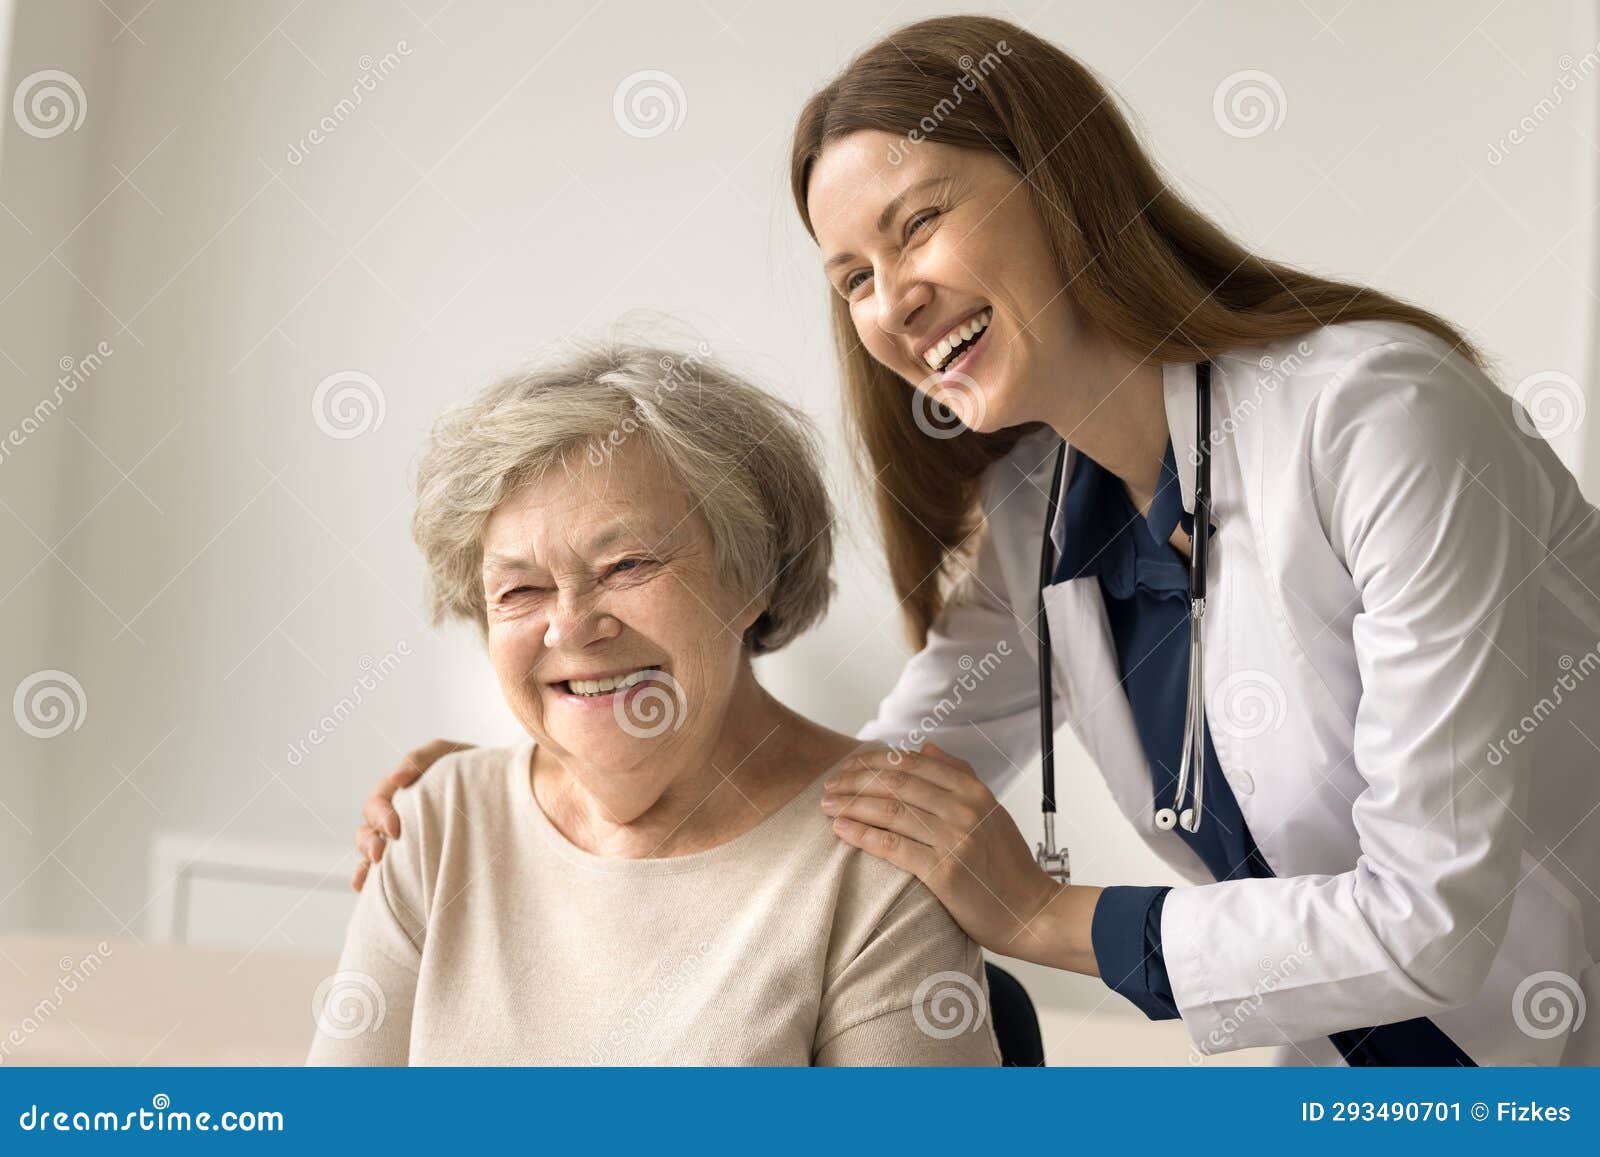 friendly medical professional give care and support to elderly person